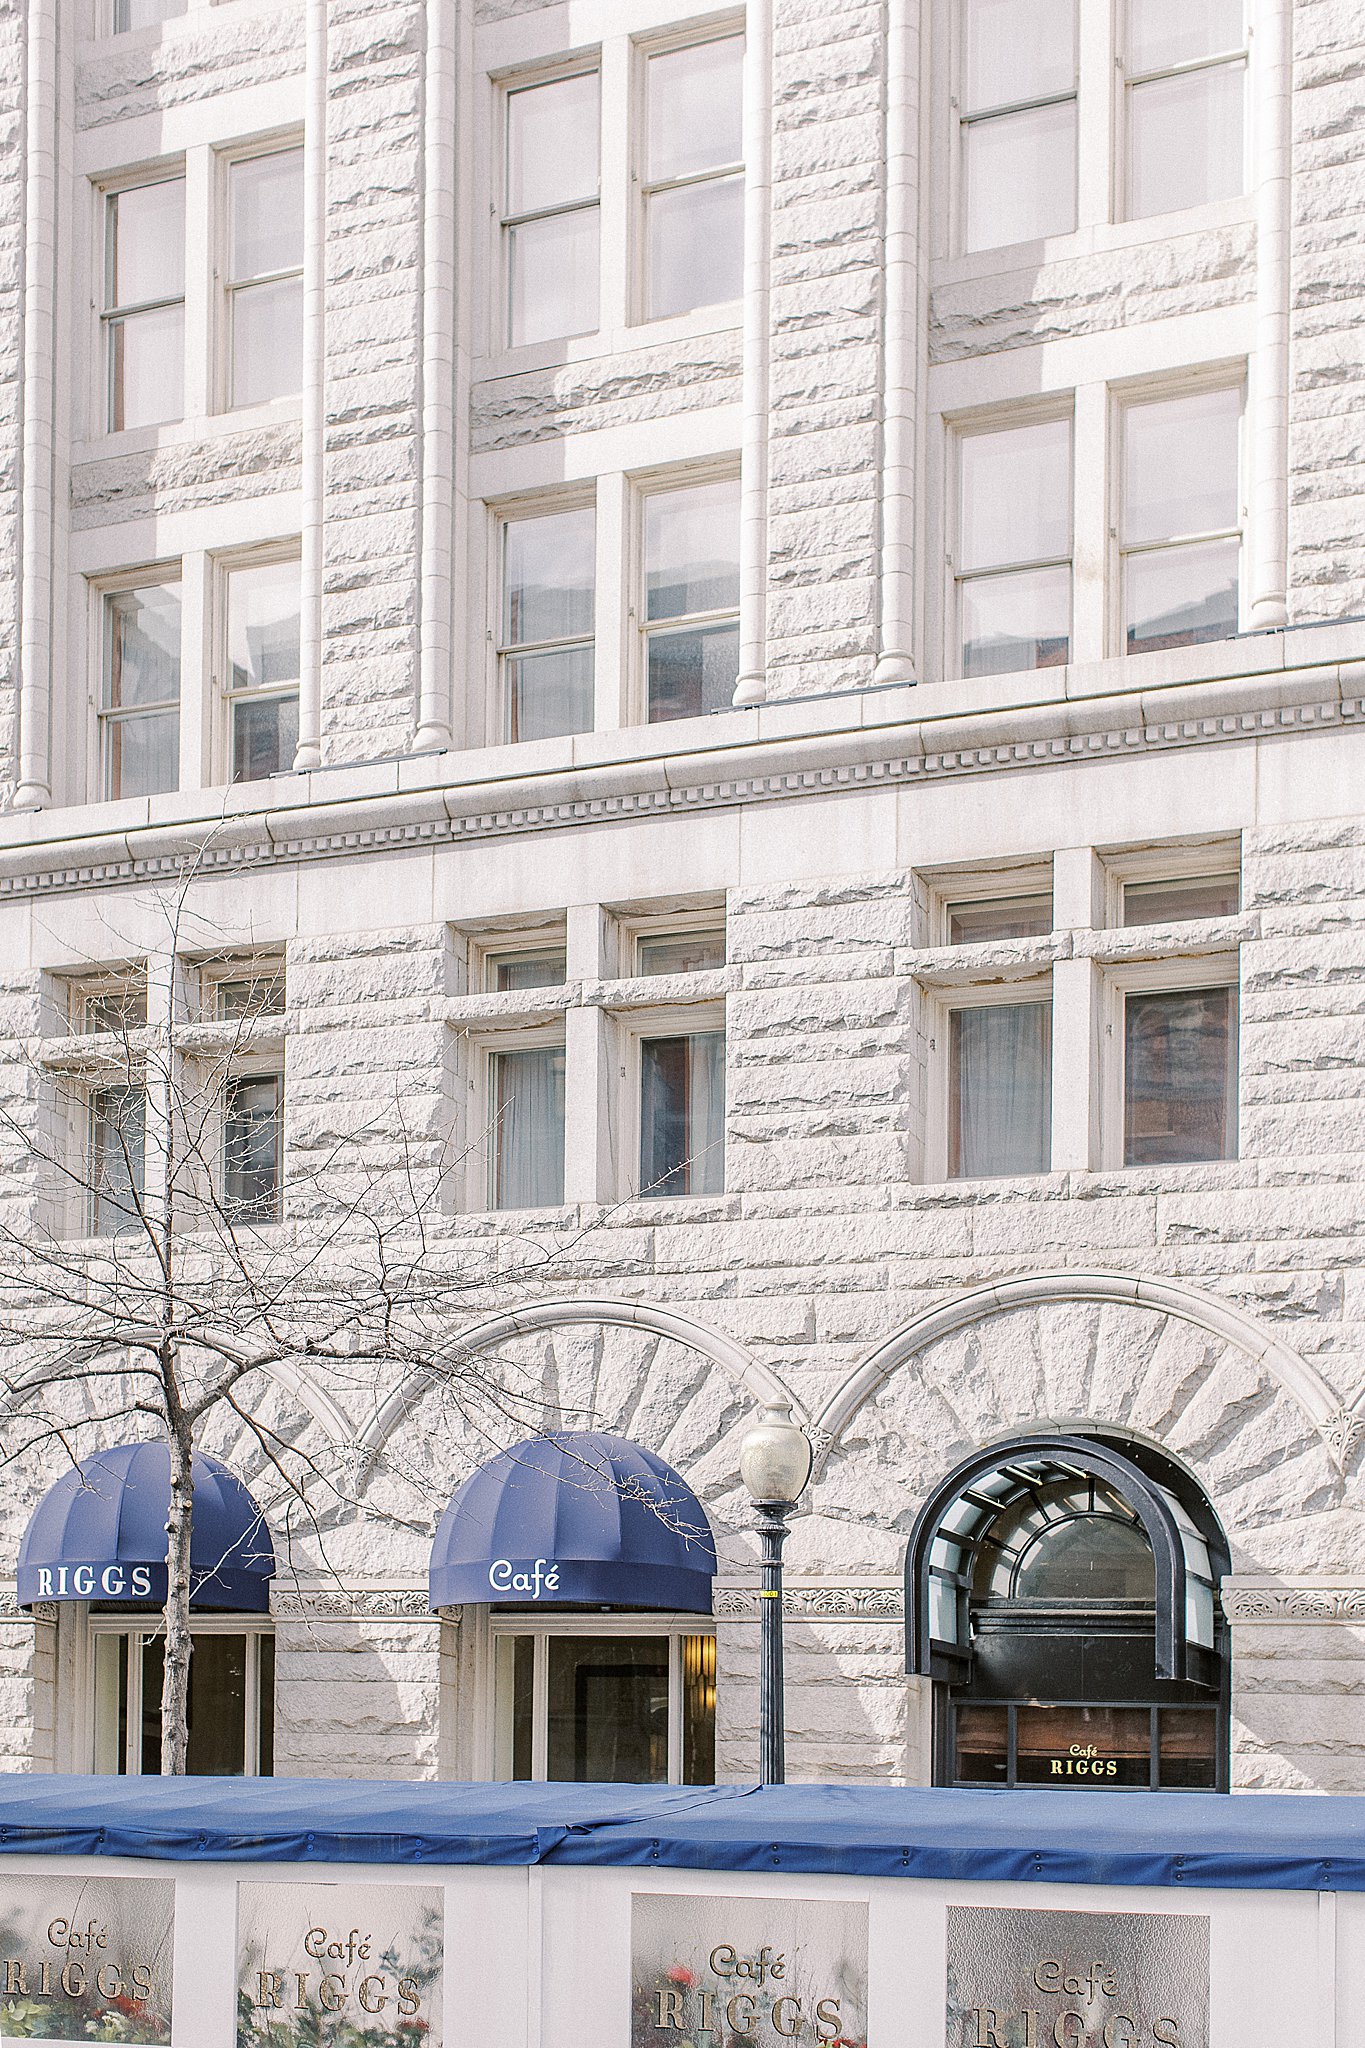 Riggs Hotel converted bank in Washington D.C.